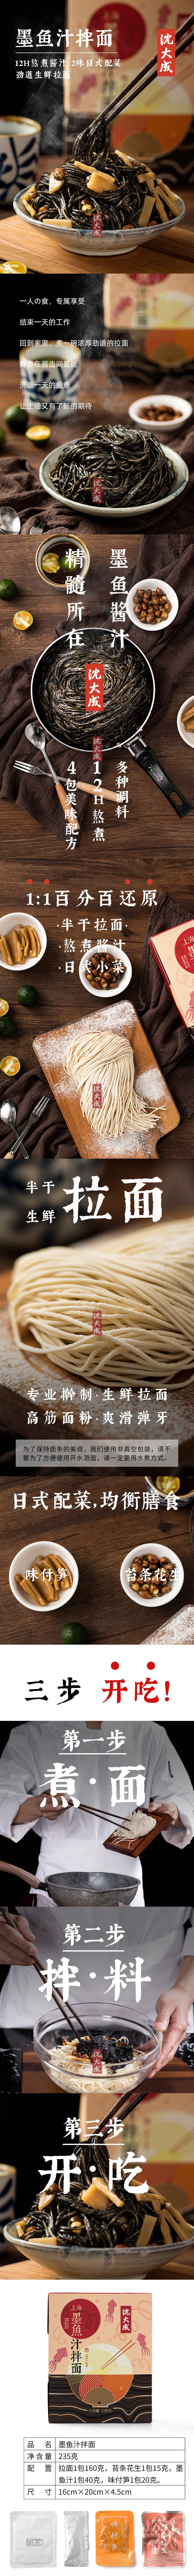 Noodles with cuttlefish sauce 235g